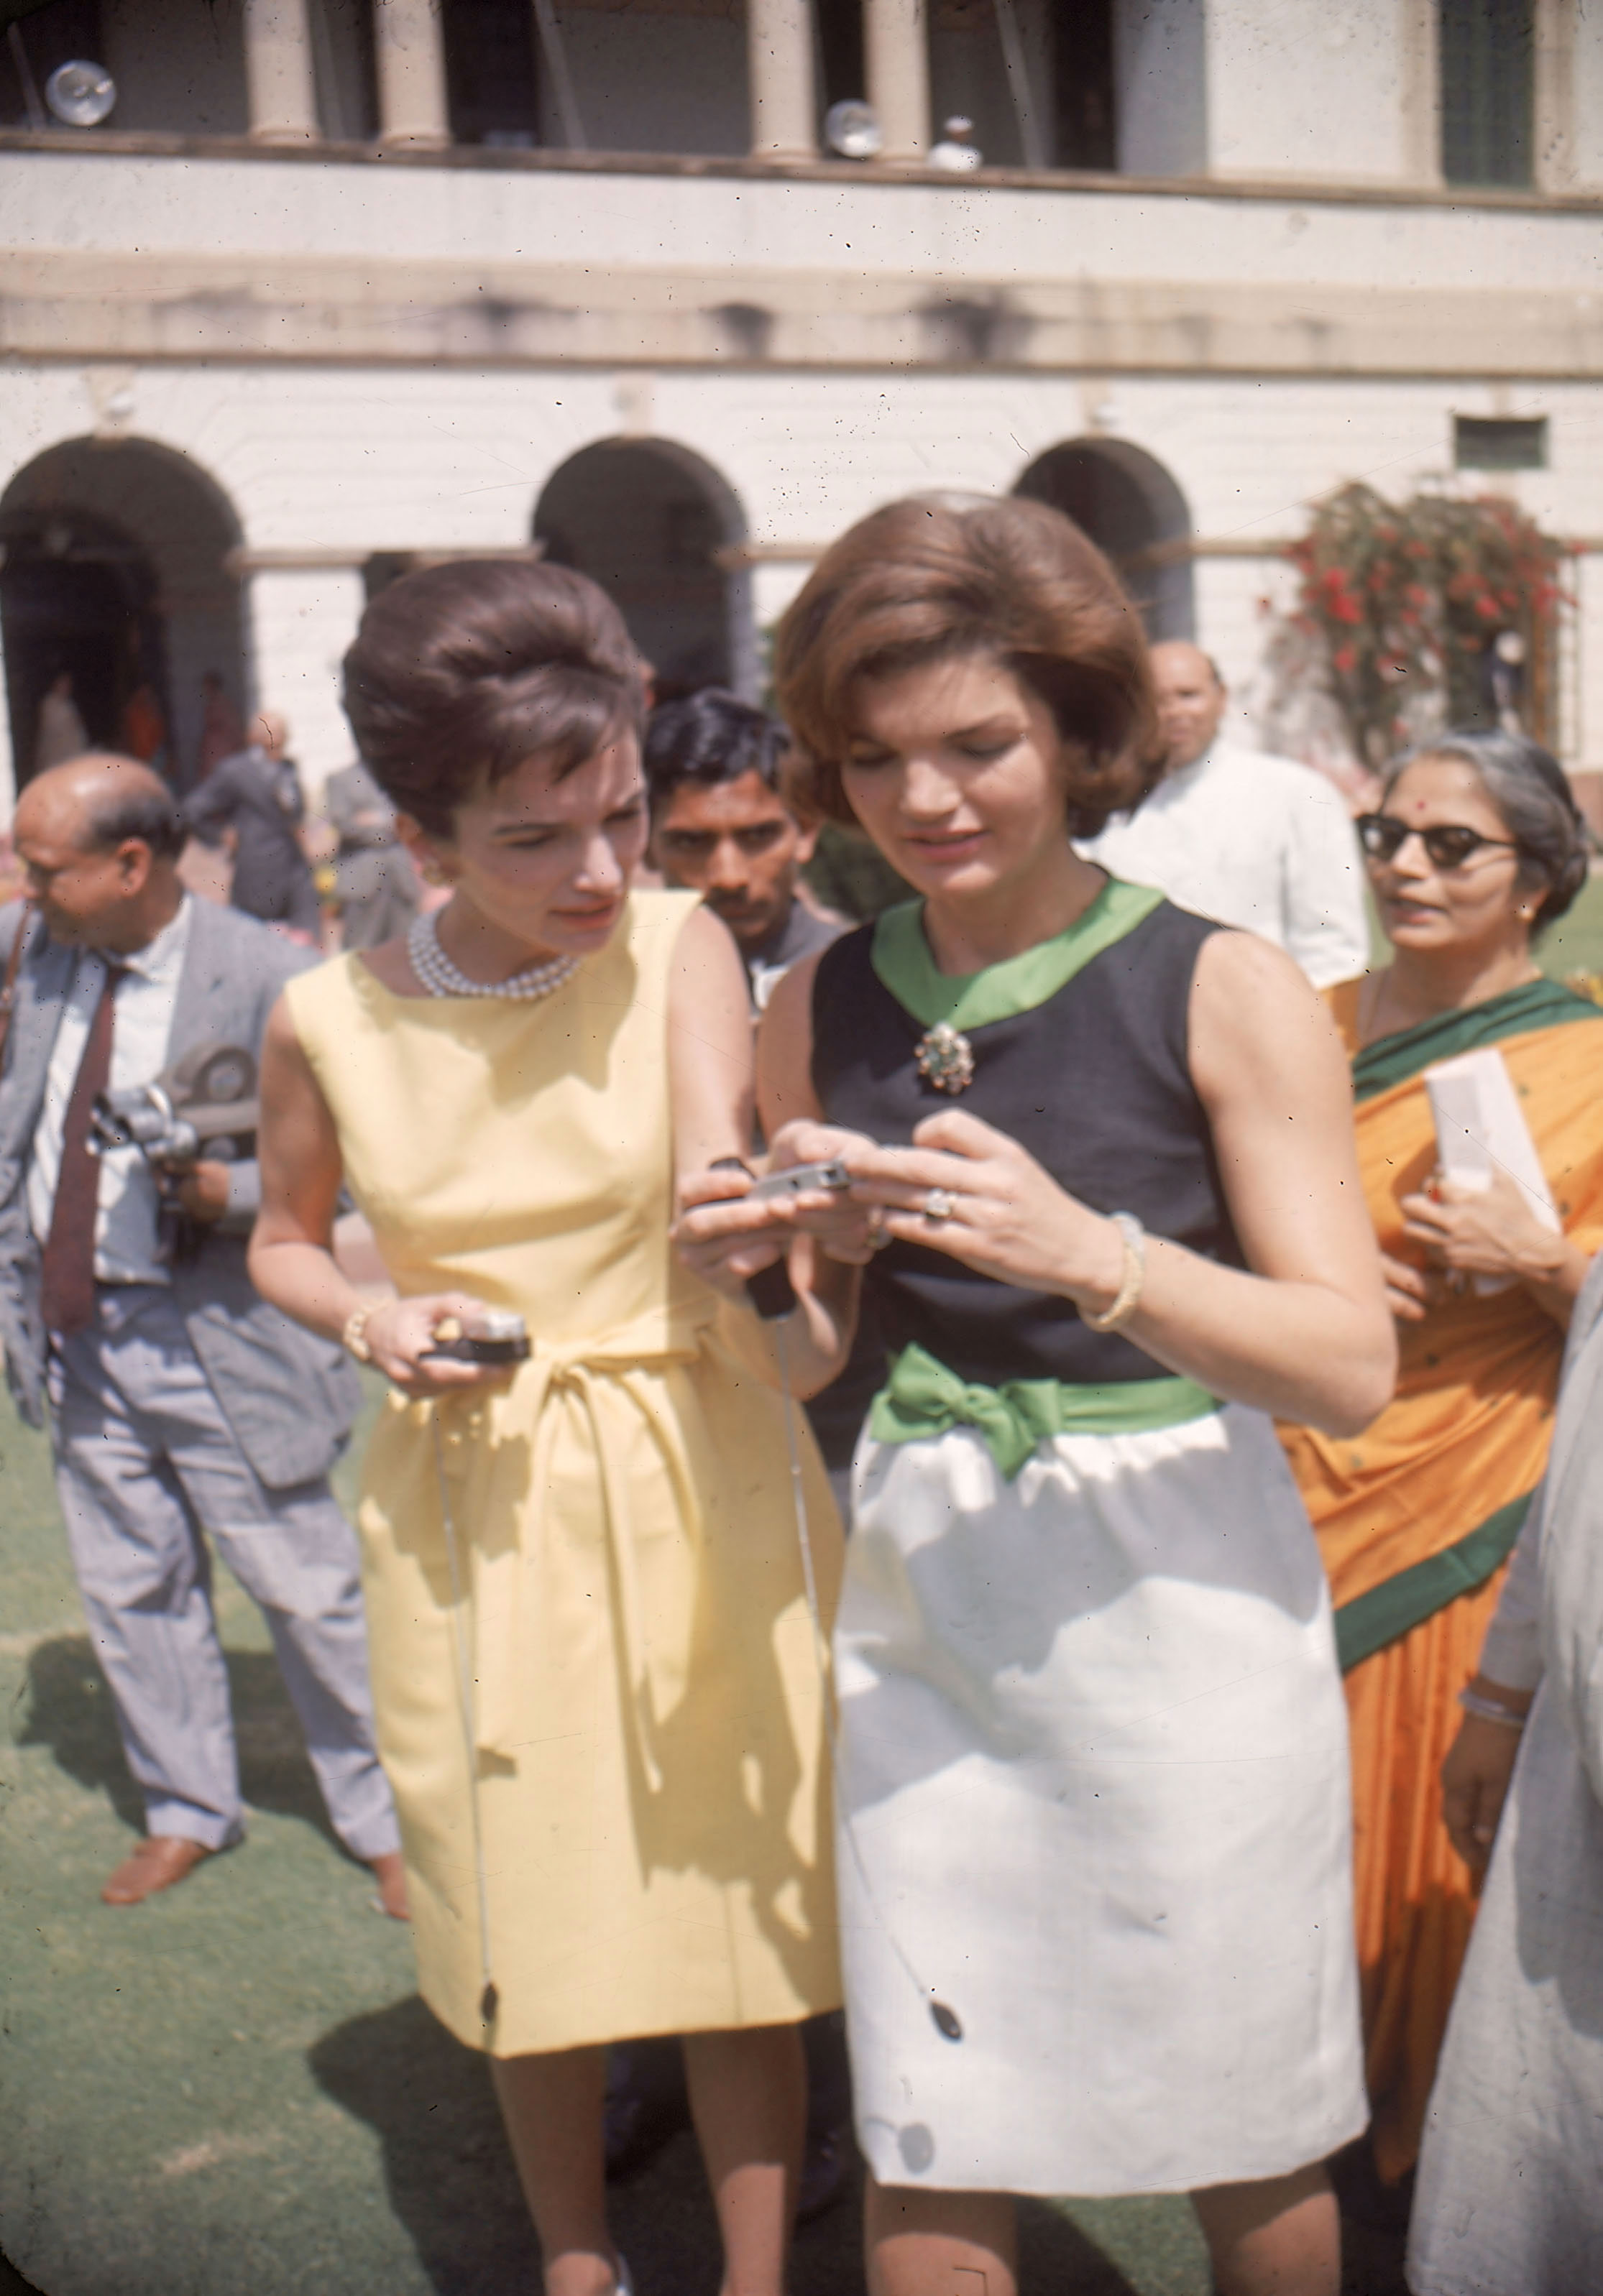 The First Lady Jackie Kennedy and sister Lee Radziwill in India in 1962. LIFE estimated Jackie wore 22 different outfits during her trip; on one day in New Delhi she changed five times.